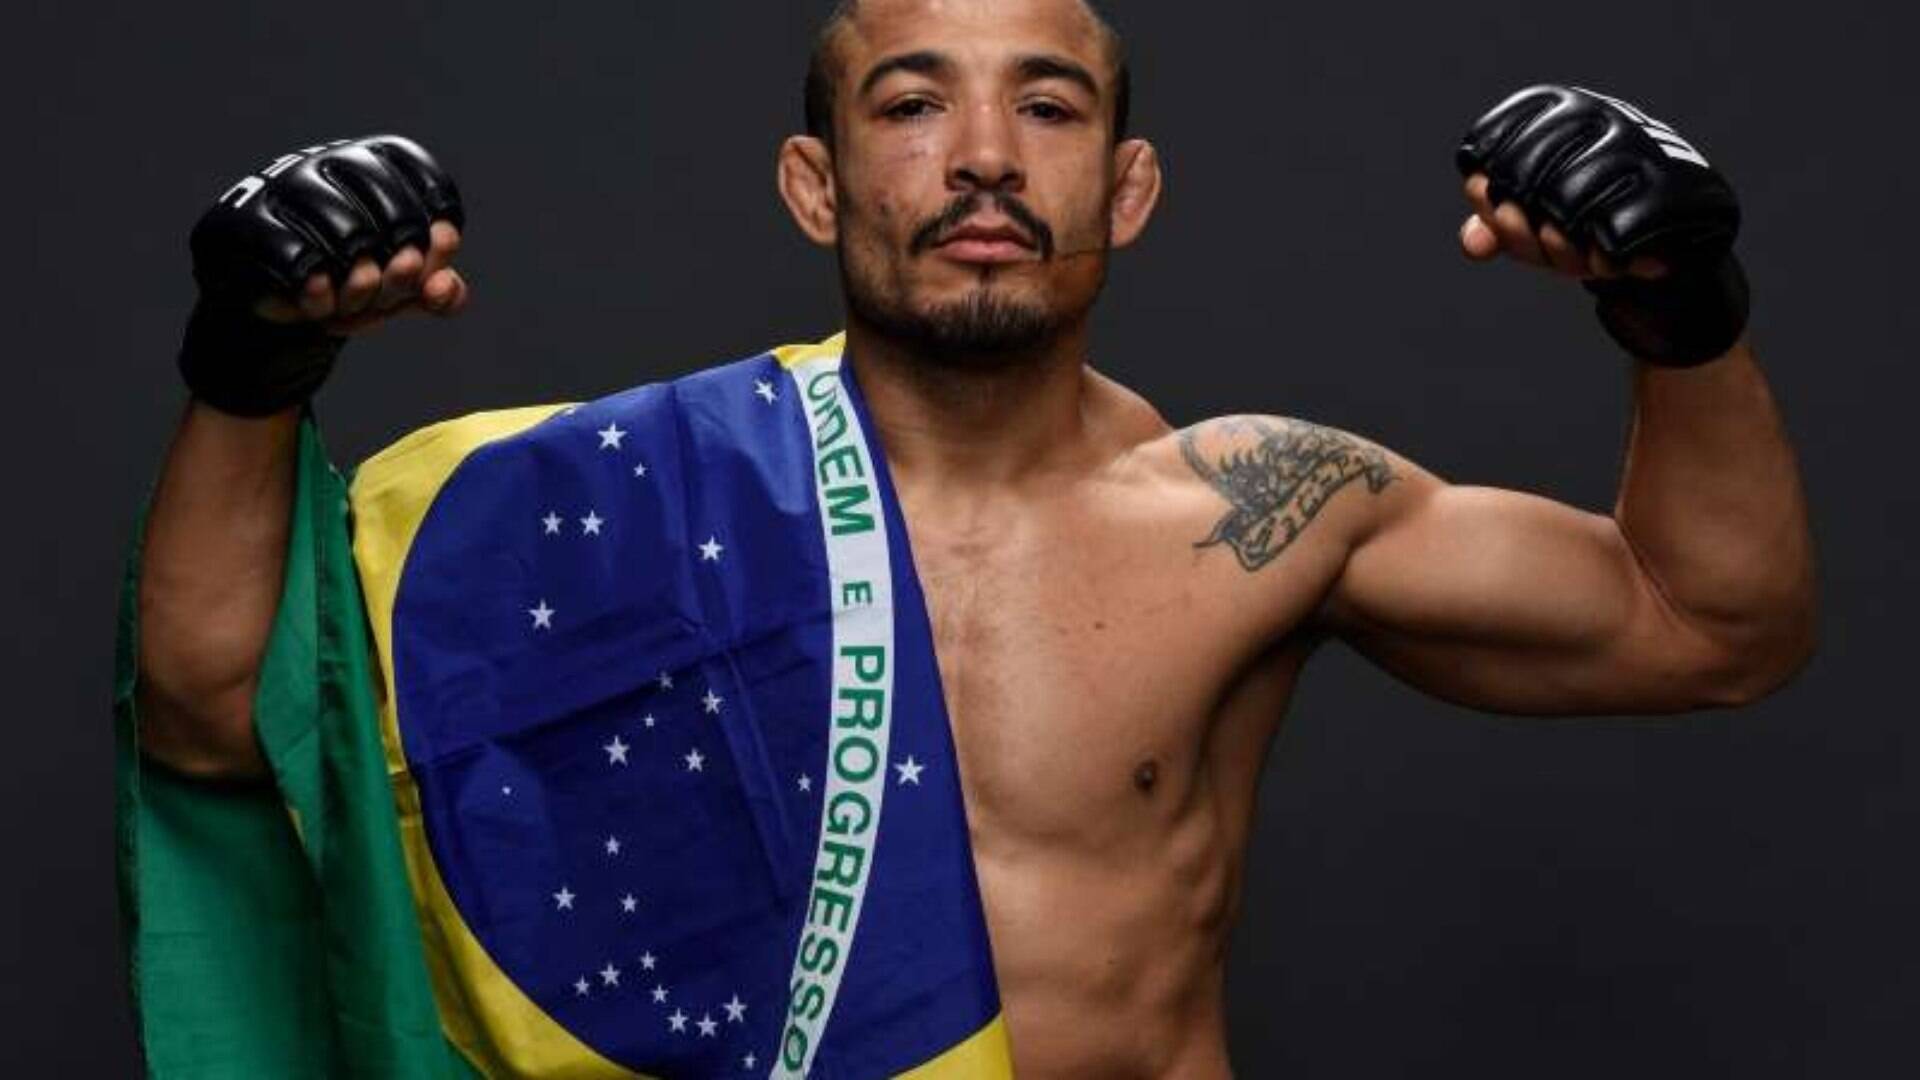 Jose aldo is obviously past his prime, but has looked great even in a diffe...